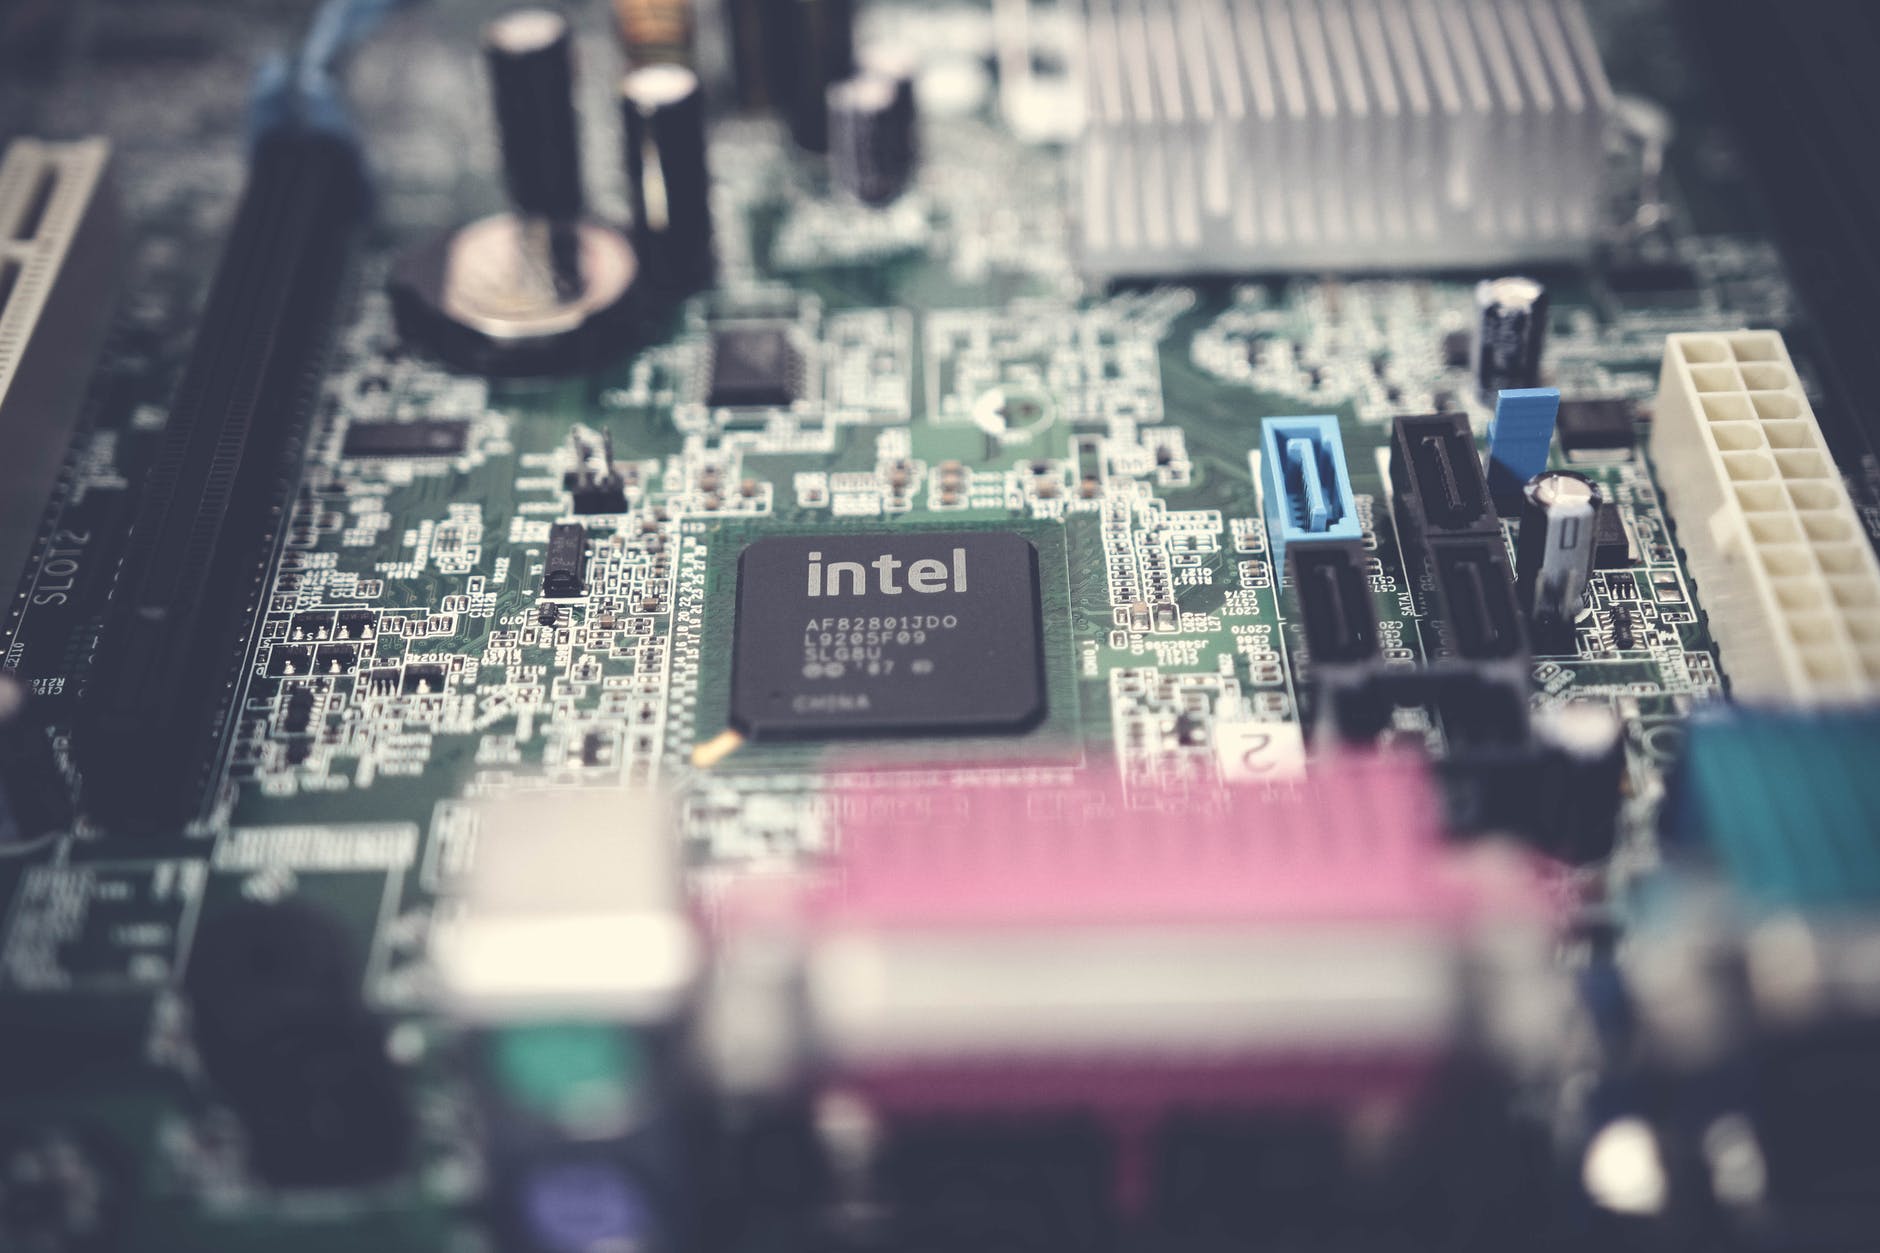 NVidia Wants To Overthrow Intel Corporation (NASDAQ:INTC) From Its Dominant Position In The Processor Industry